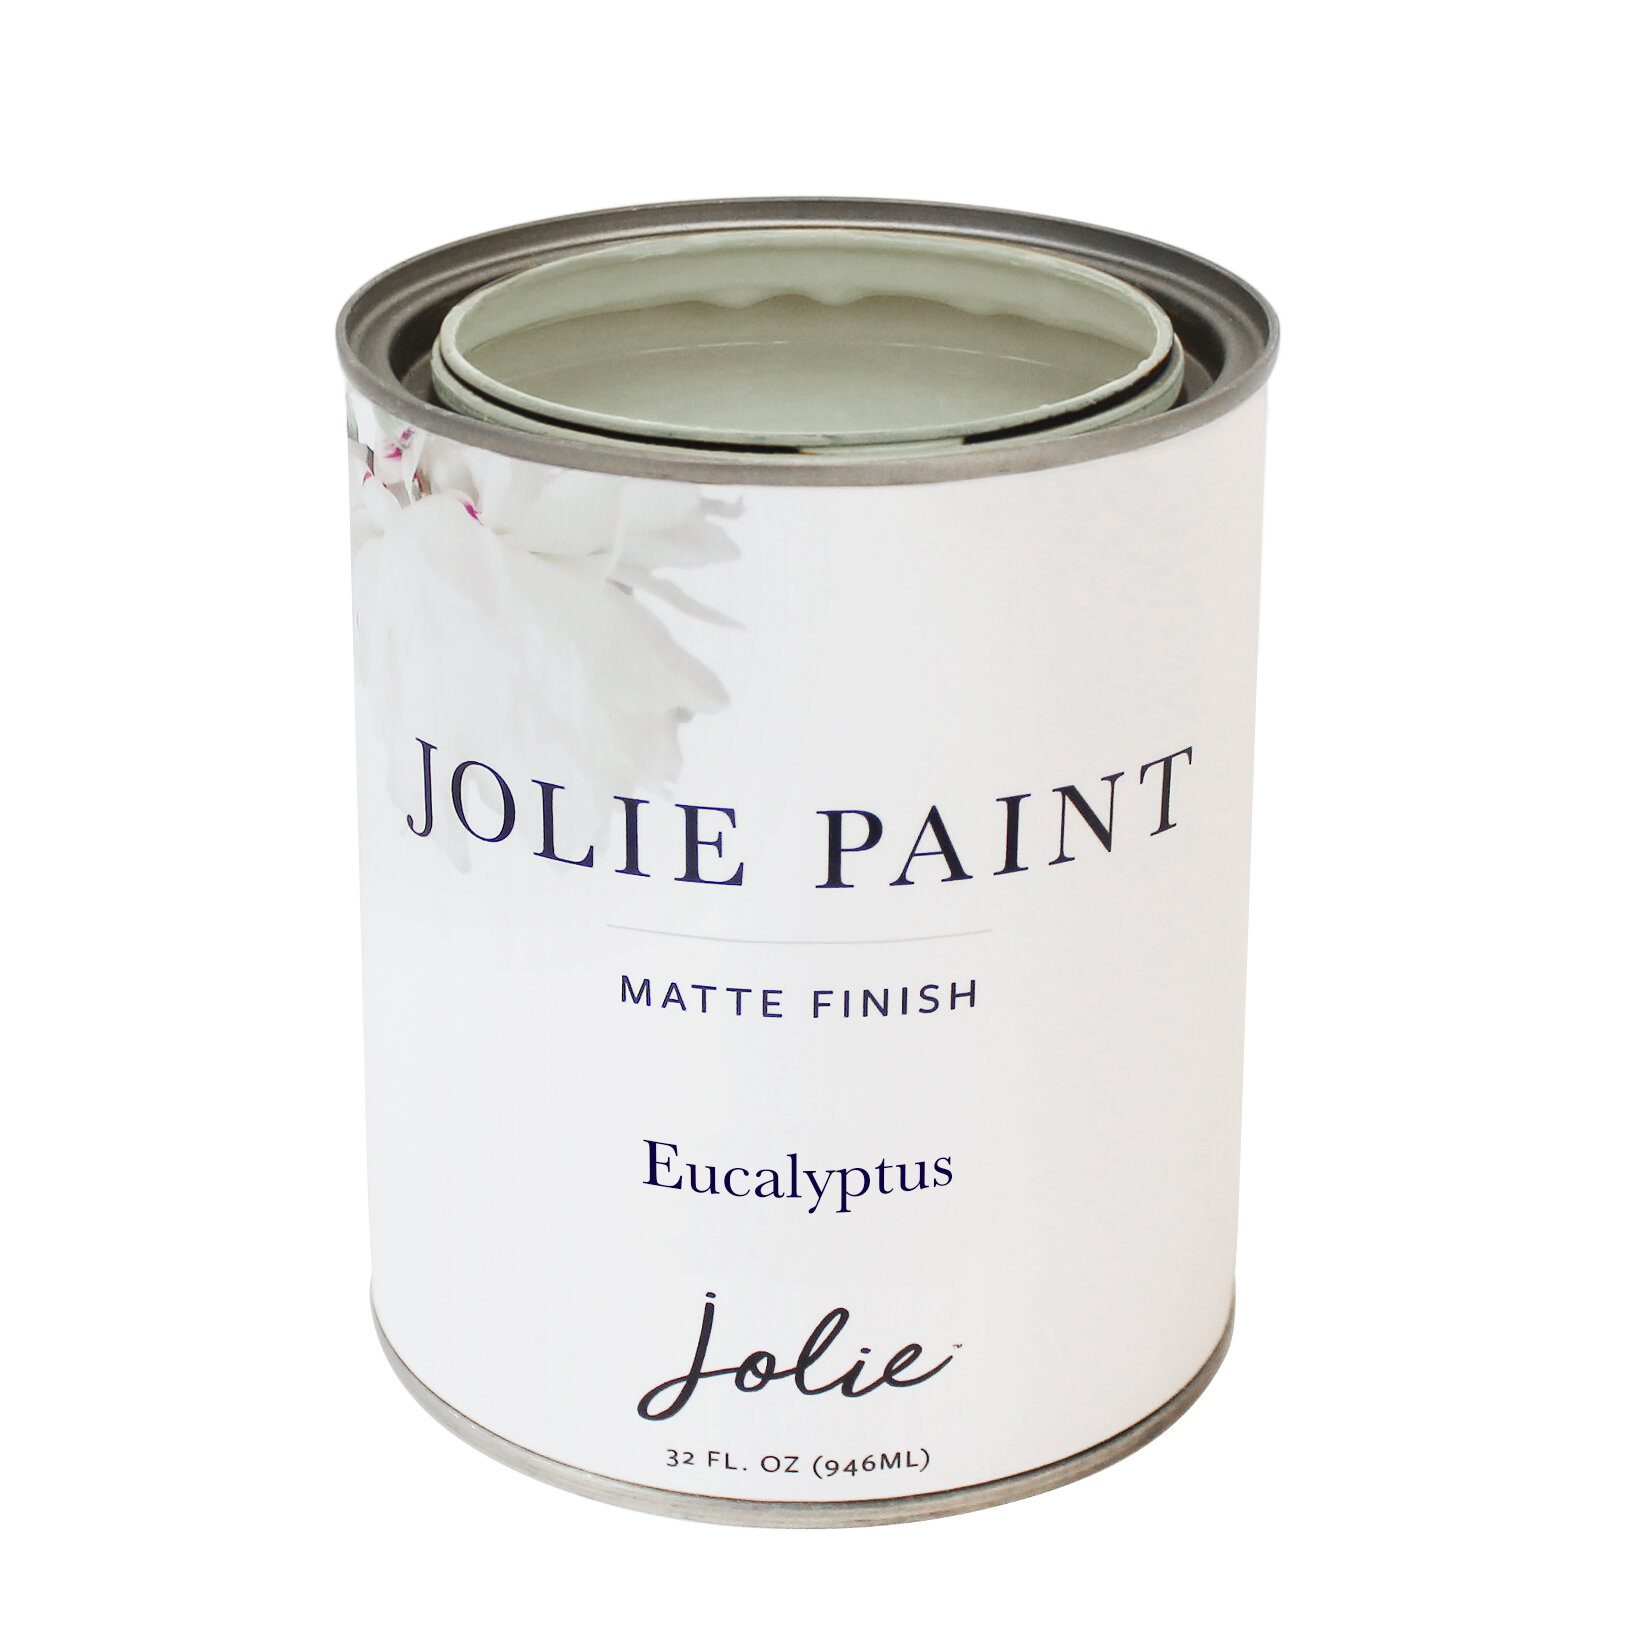 Painting with Jolie Paint — Allure with Decor